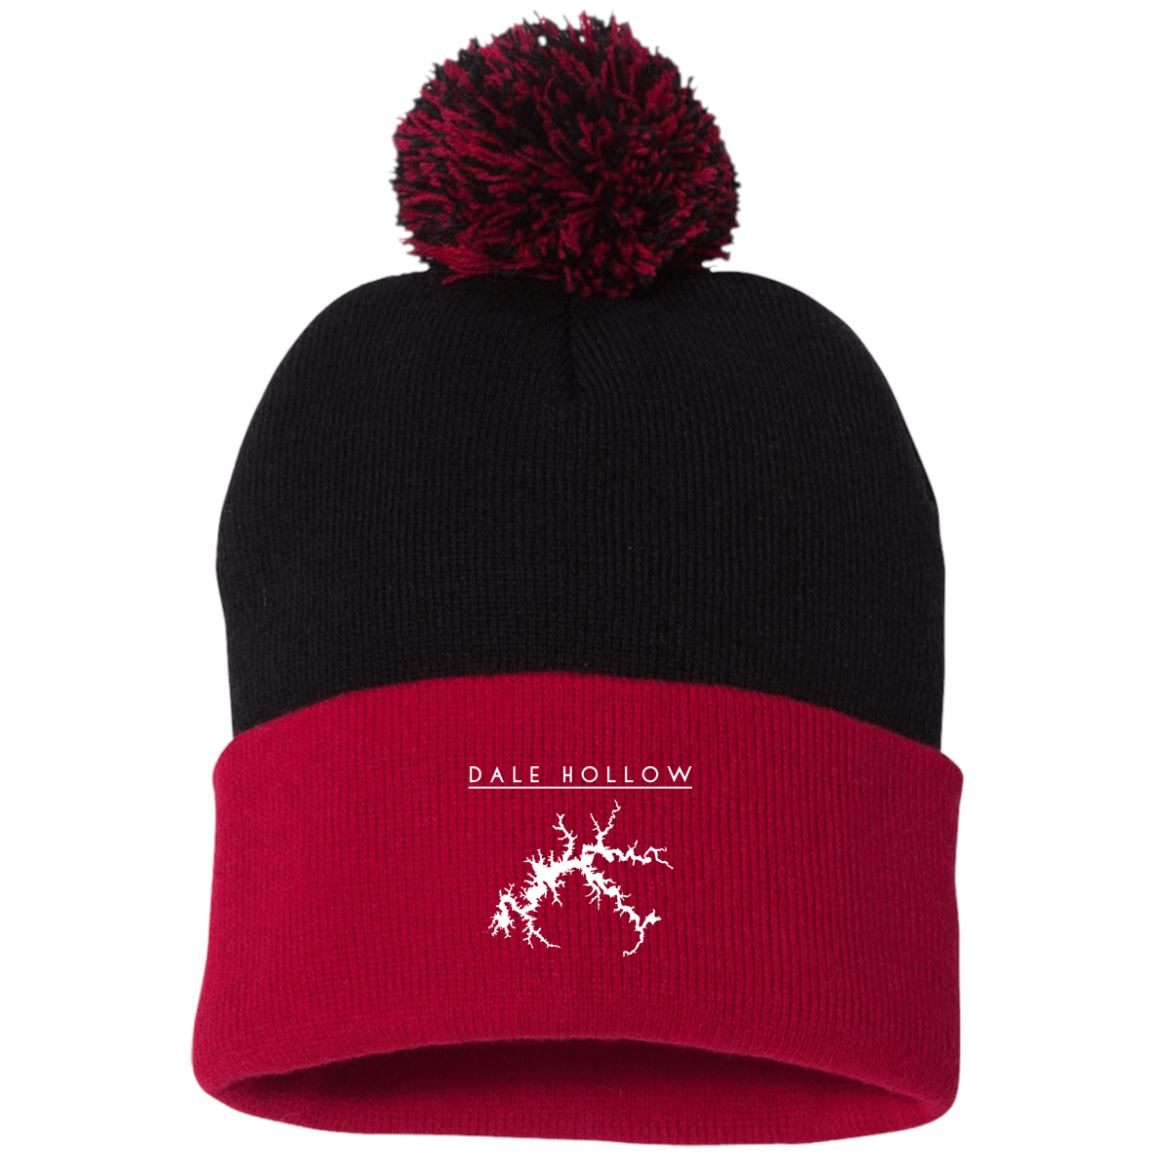 Dale Hollow Embroidered Sportsman Pom Pom Knit Cap - Houseboat Kings